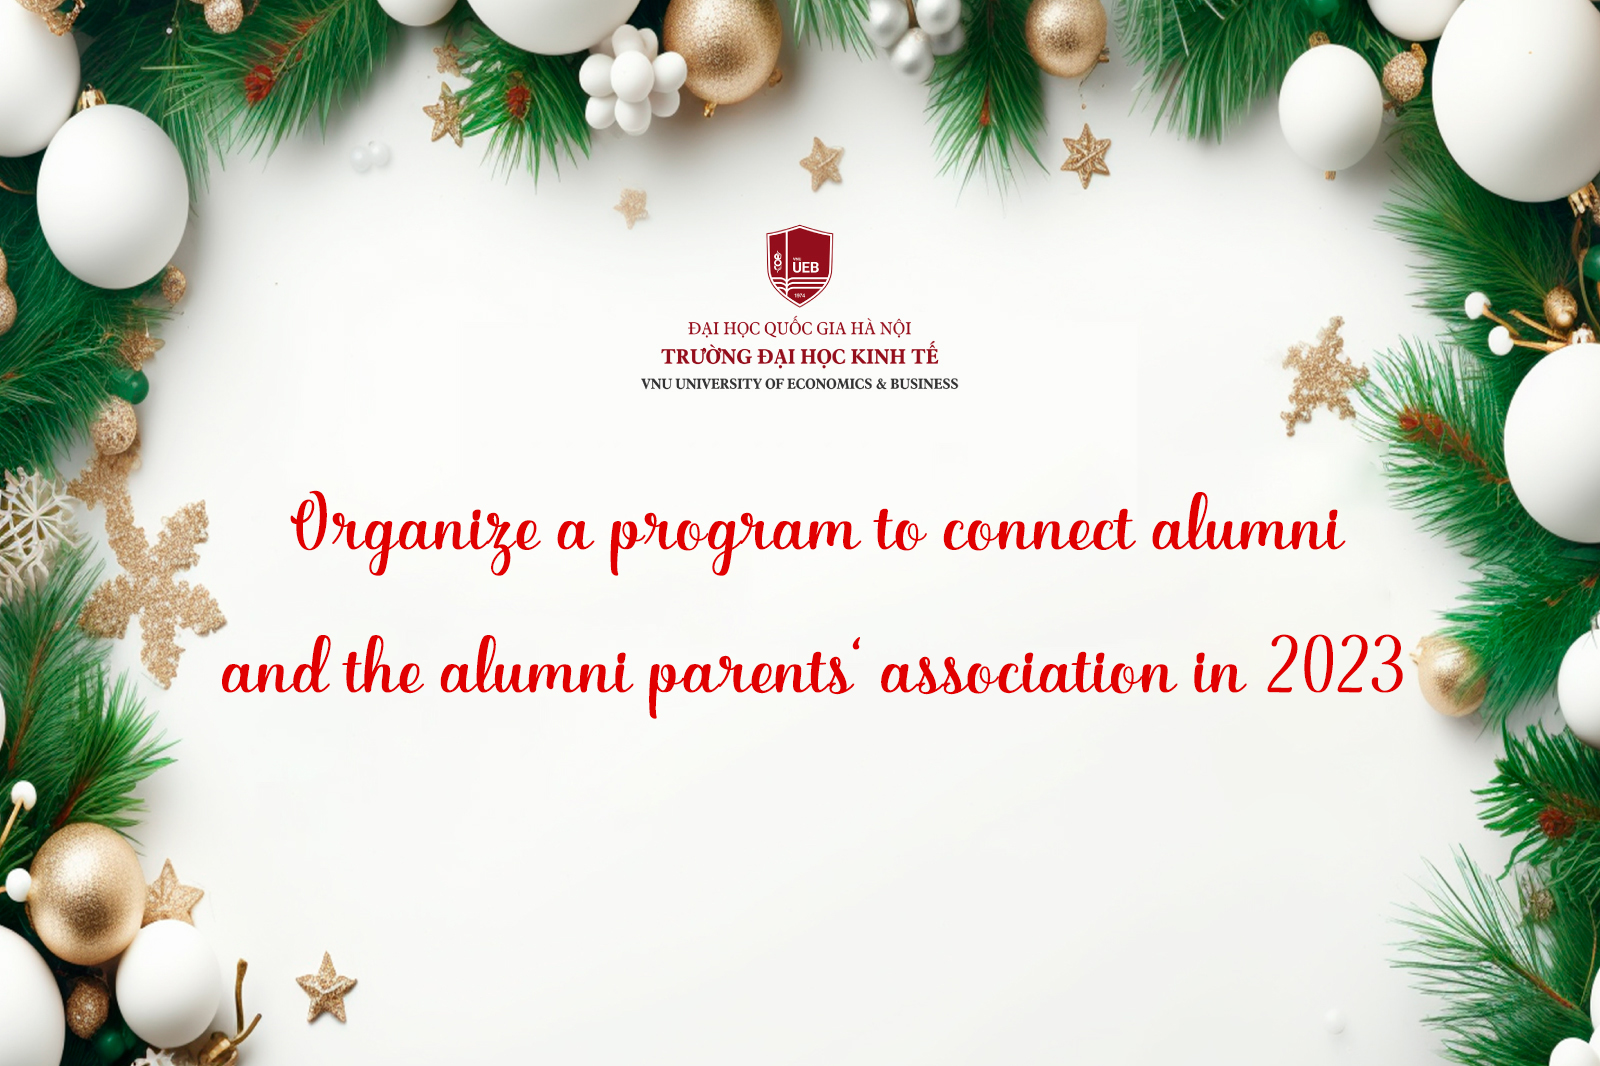 Organize a program to connect alumni and the alumni parents' association in 2023